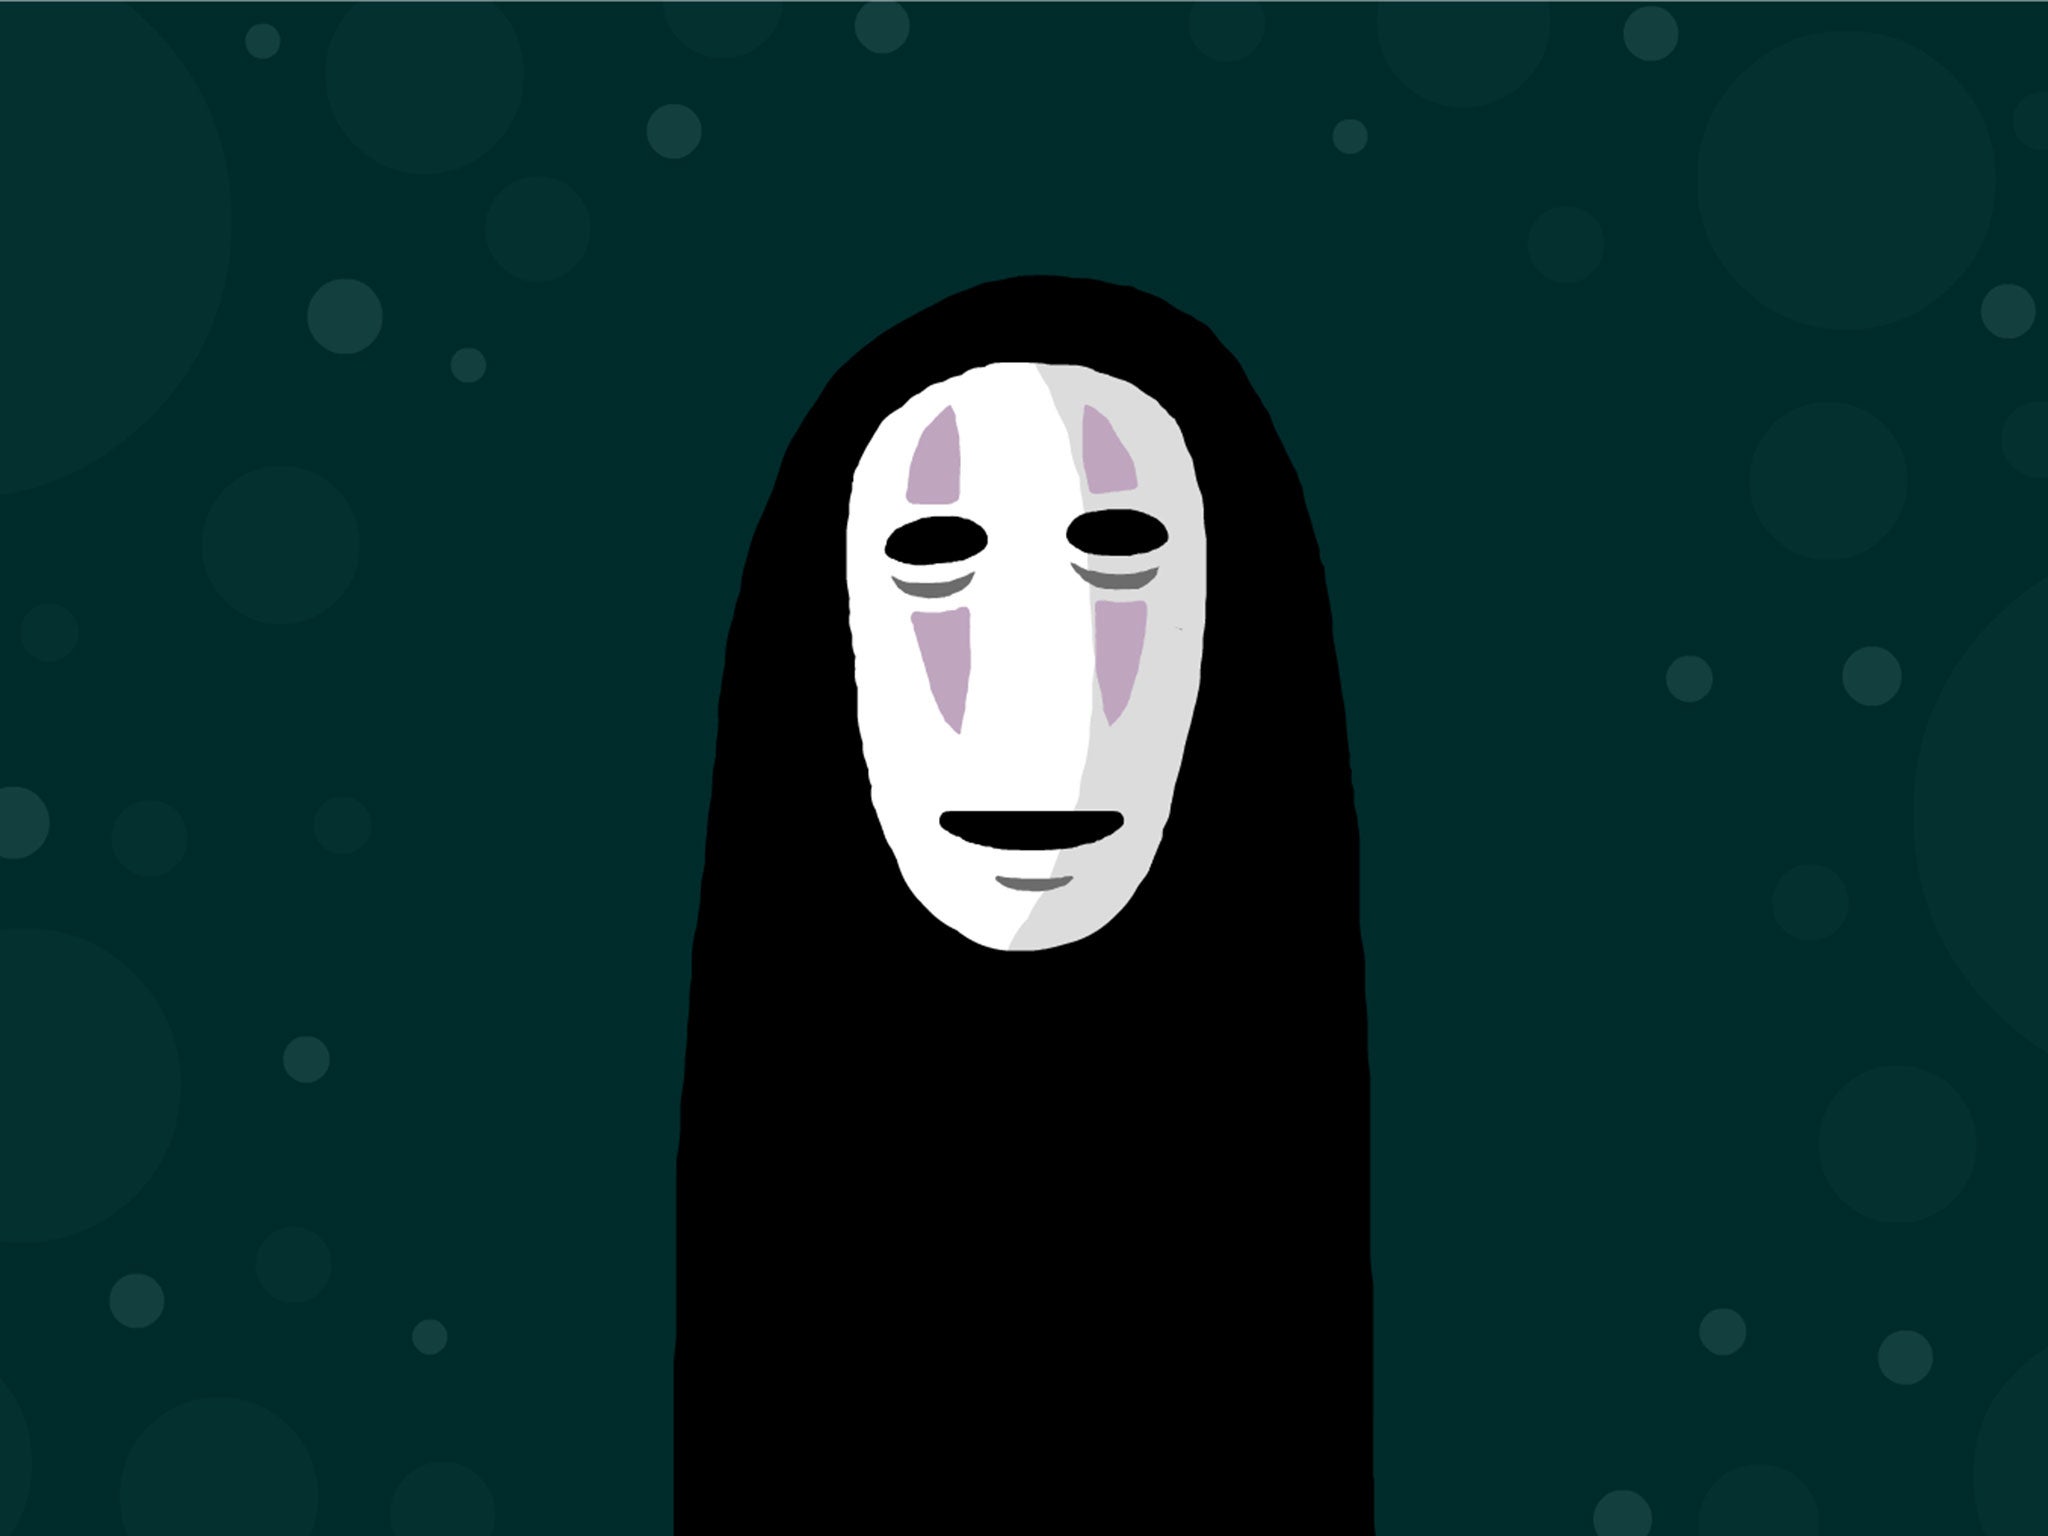 Many workers chose masked resembling No-Face from Spirited Away